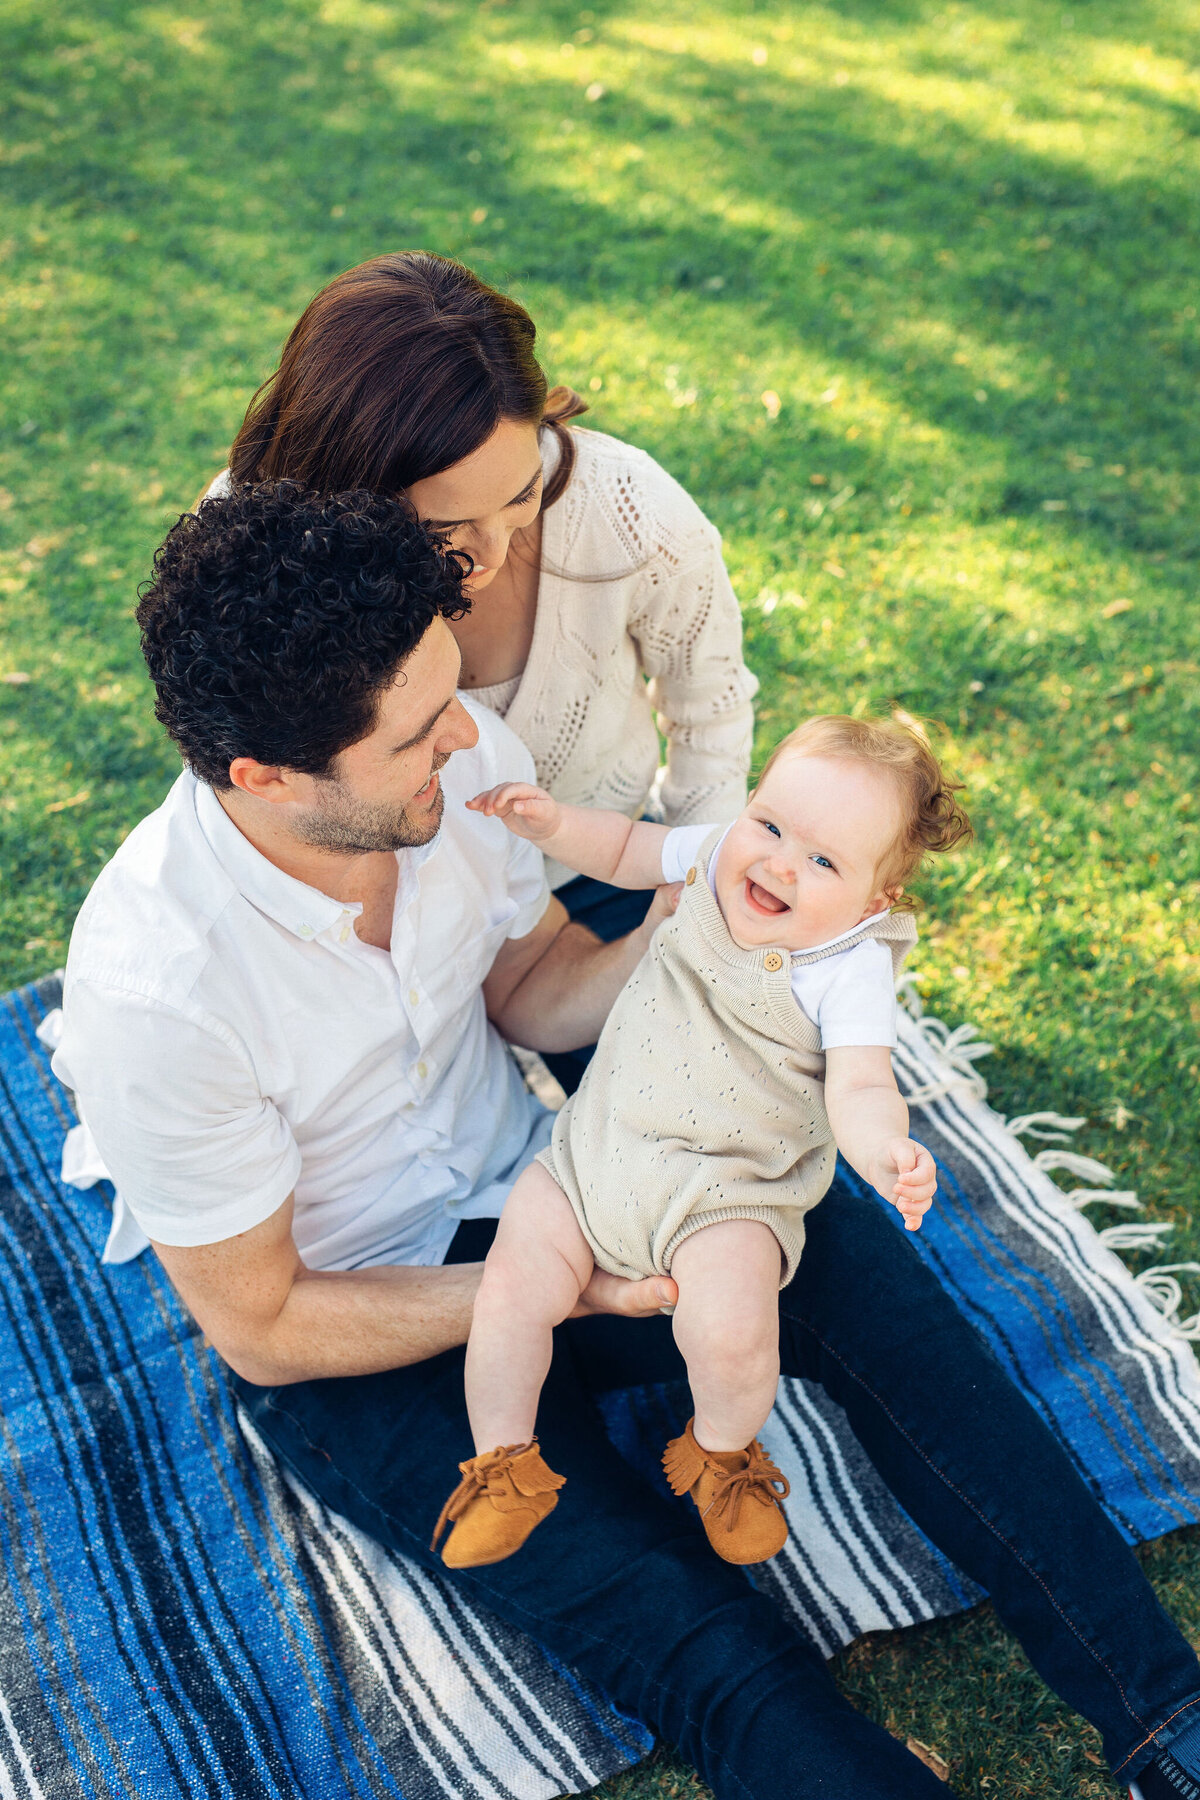 Family Portrait Photo Of Couple Holding Their Baby While Sitting On The Ground Los Angeles